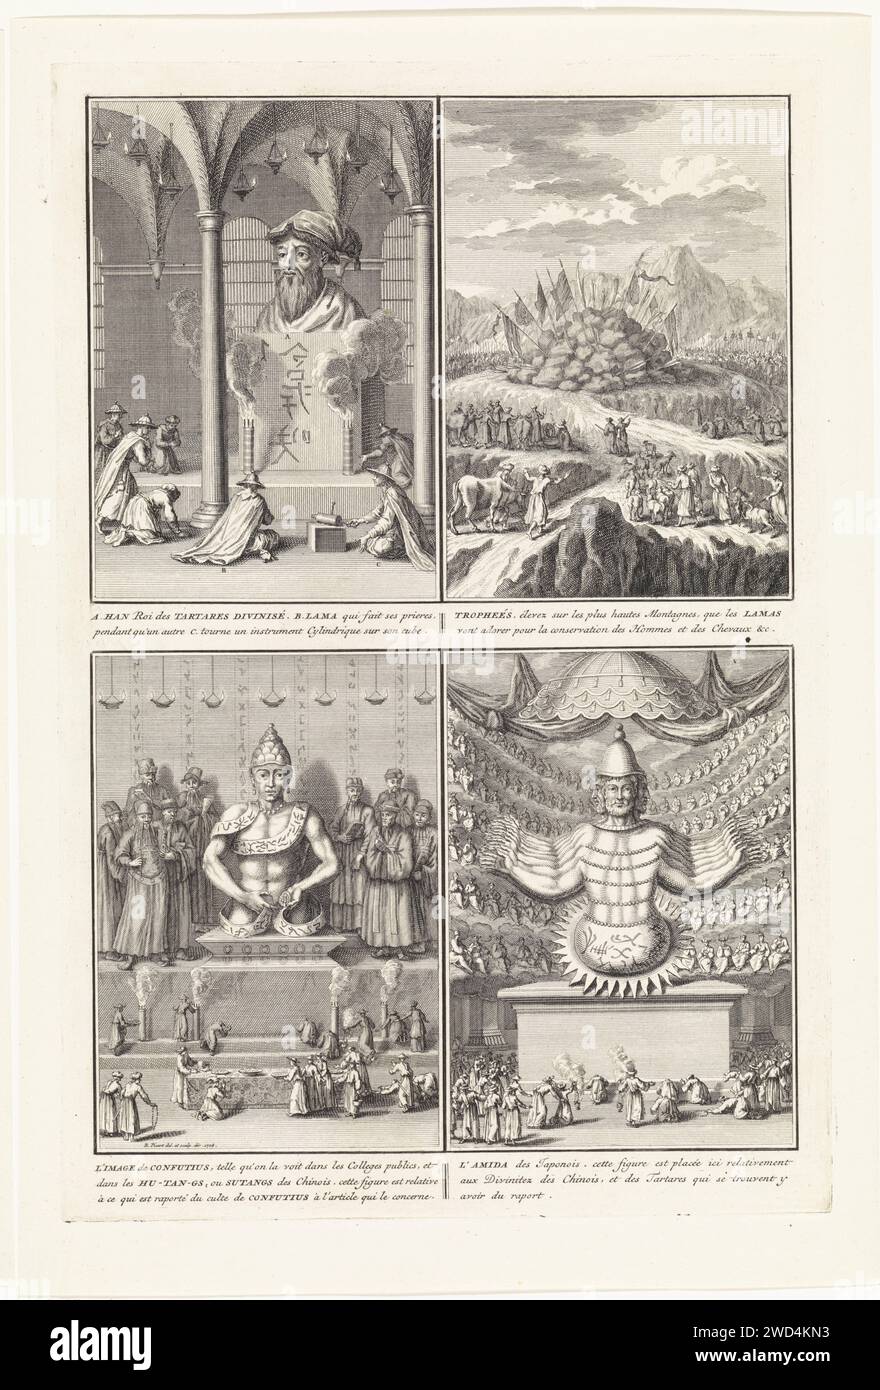 Gods and customs in China and Japan, Bernard Picart (workshop or), After Bernard Picart, 1728 print Leaf with four performances of Buddhist gods, Confusius and customs in China. At the top left: image of Han, king of the people Tangut. A lama or priest kneels for him. At the top right: Lama's praying at flags in the mountains. Bottom left: image and worship of Confusius. Bottom right: the Japanese god Amida. Amsterdam paper etching / engraving conceptions and ideas visualized  traditional Chinese religions. representations  gods, demi-gods, heroes, etc. (traditional Chinese religions) Stock Photo